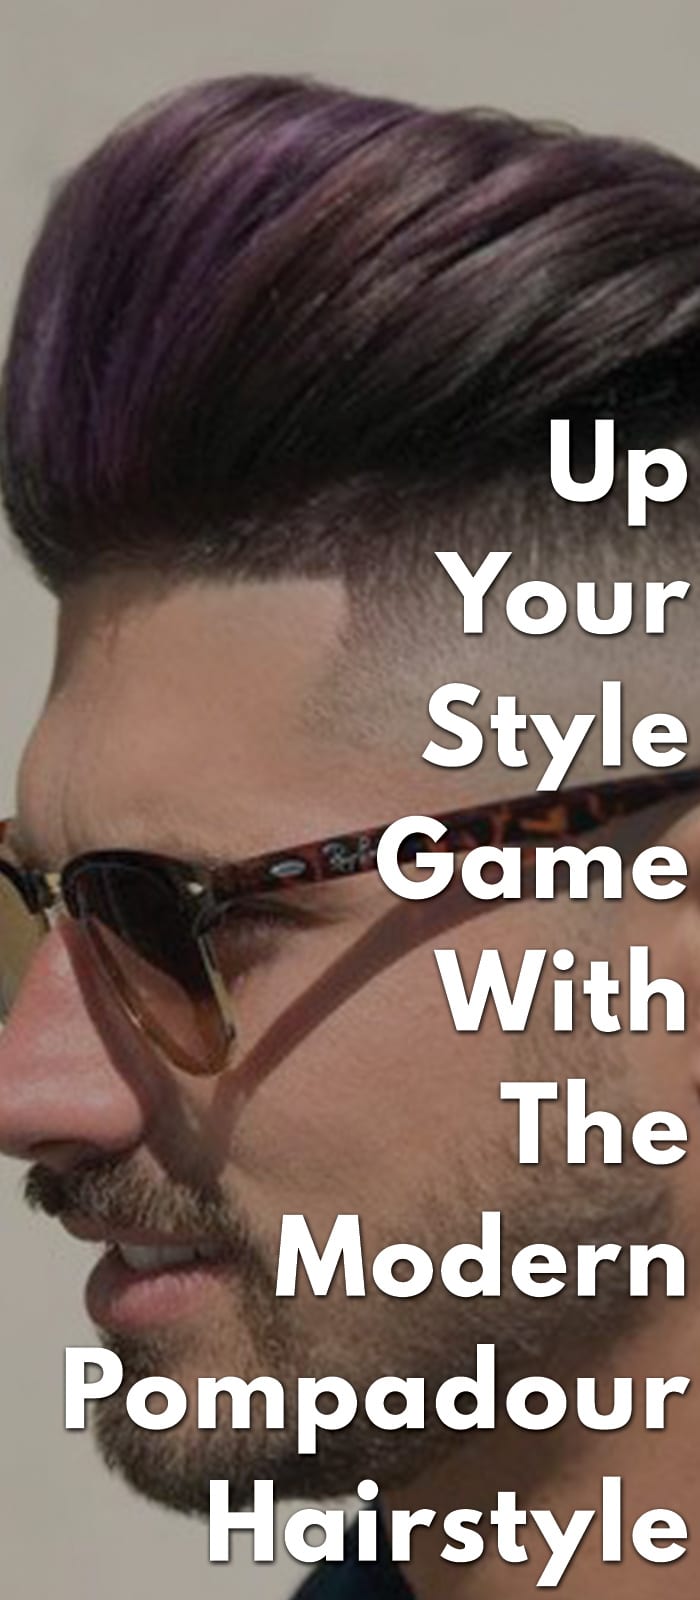 Up Your Style Game With The Modern Pompadour